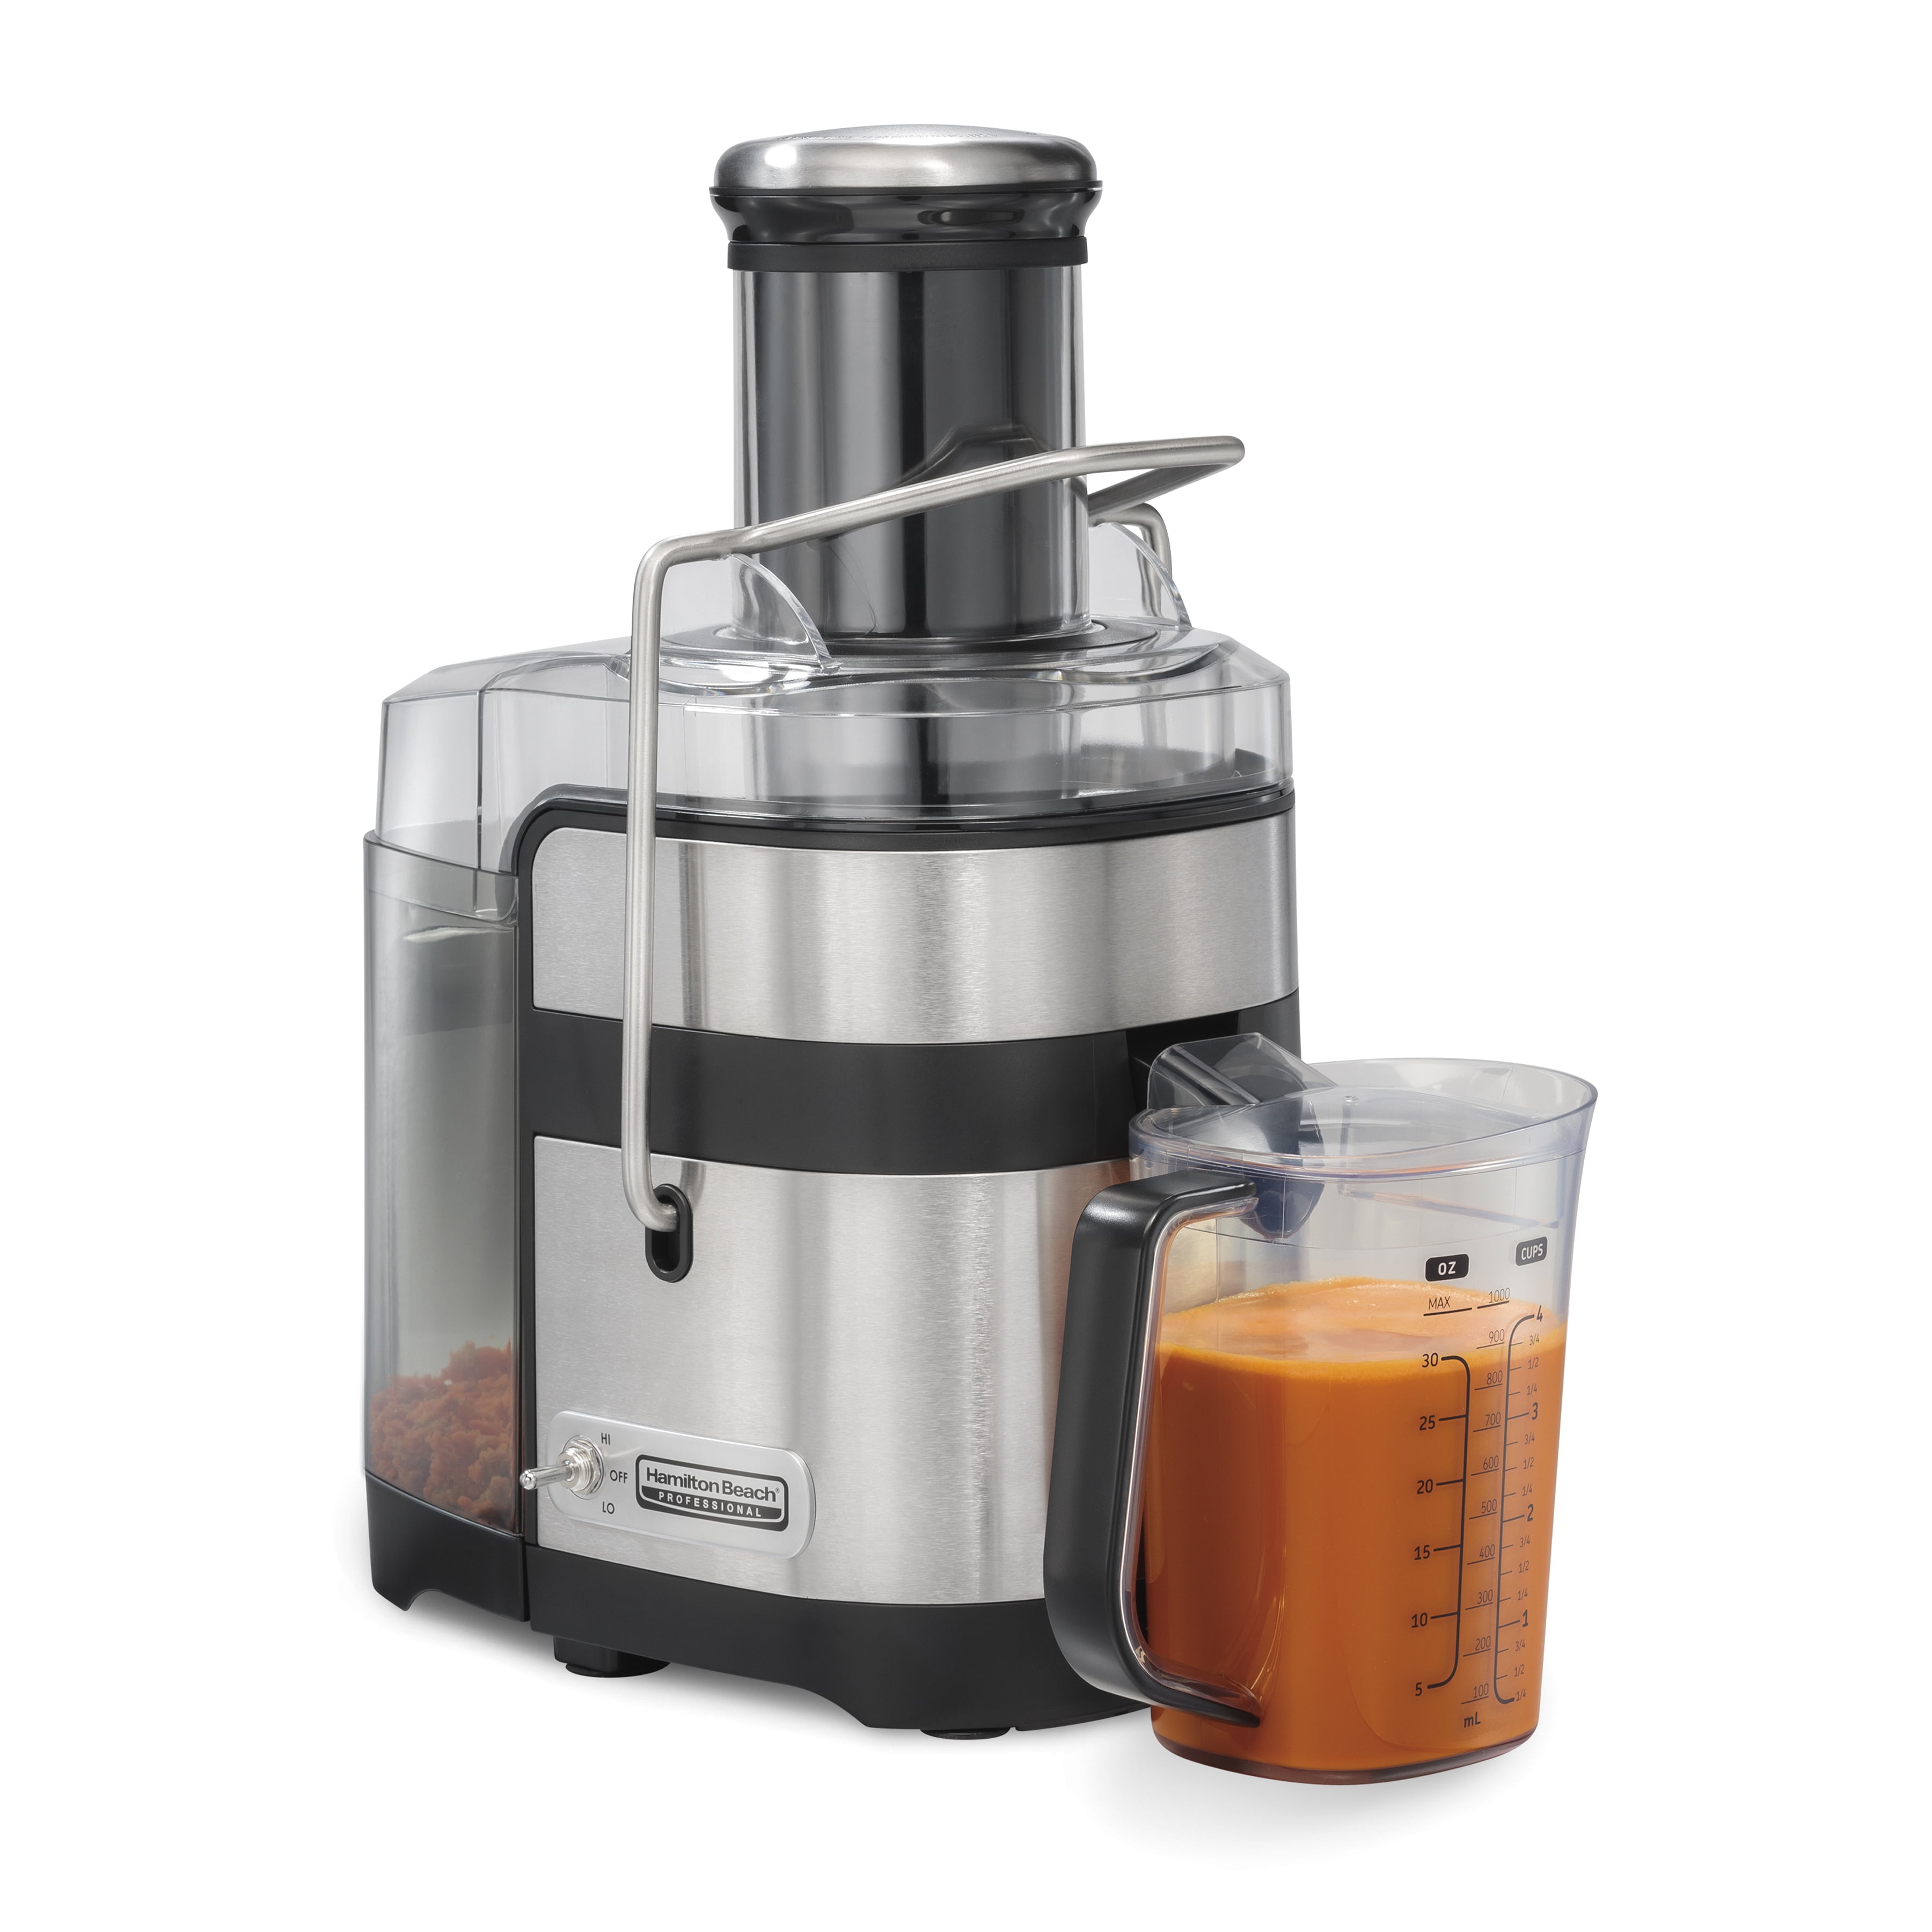 Hamilton Beach 67951 Cold Press Masticating Juicer Machine, Slow and Quiet  Action, Juice Fruits & Vegetables, BPA Free, Easy Clean, 150 Watts, Silver